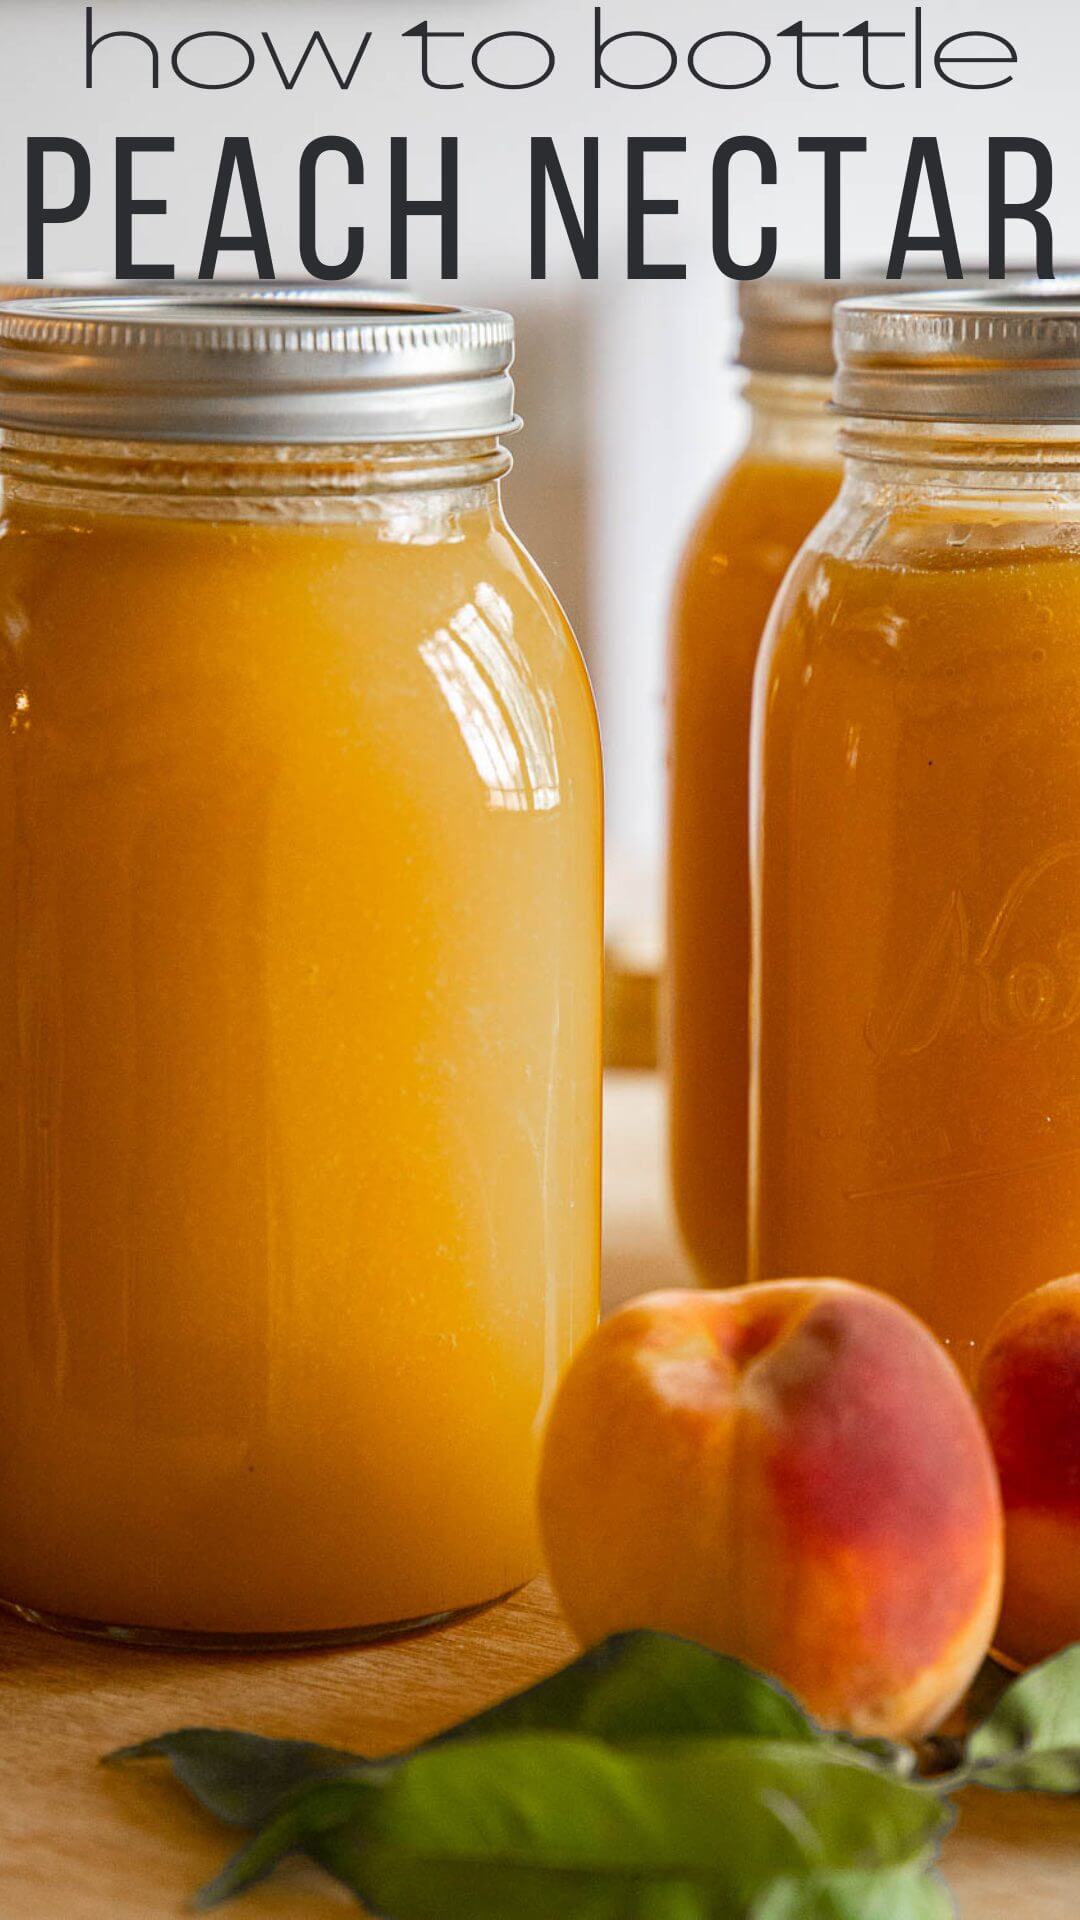 How to make and bottle fresh peach nectar. This is an great item to have in your pantry. It tastes like fresh peaches and is so smooth.